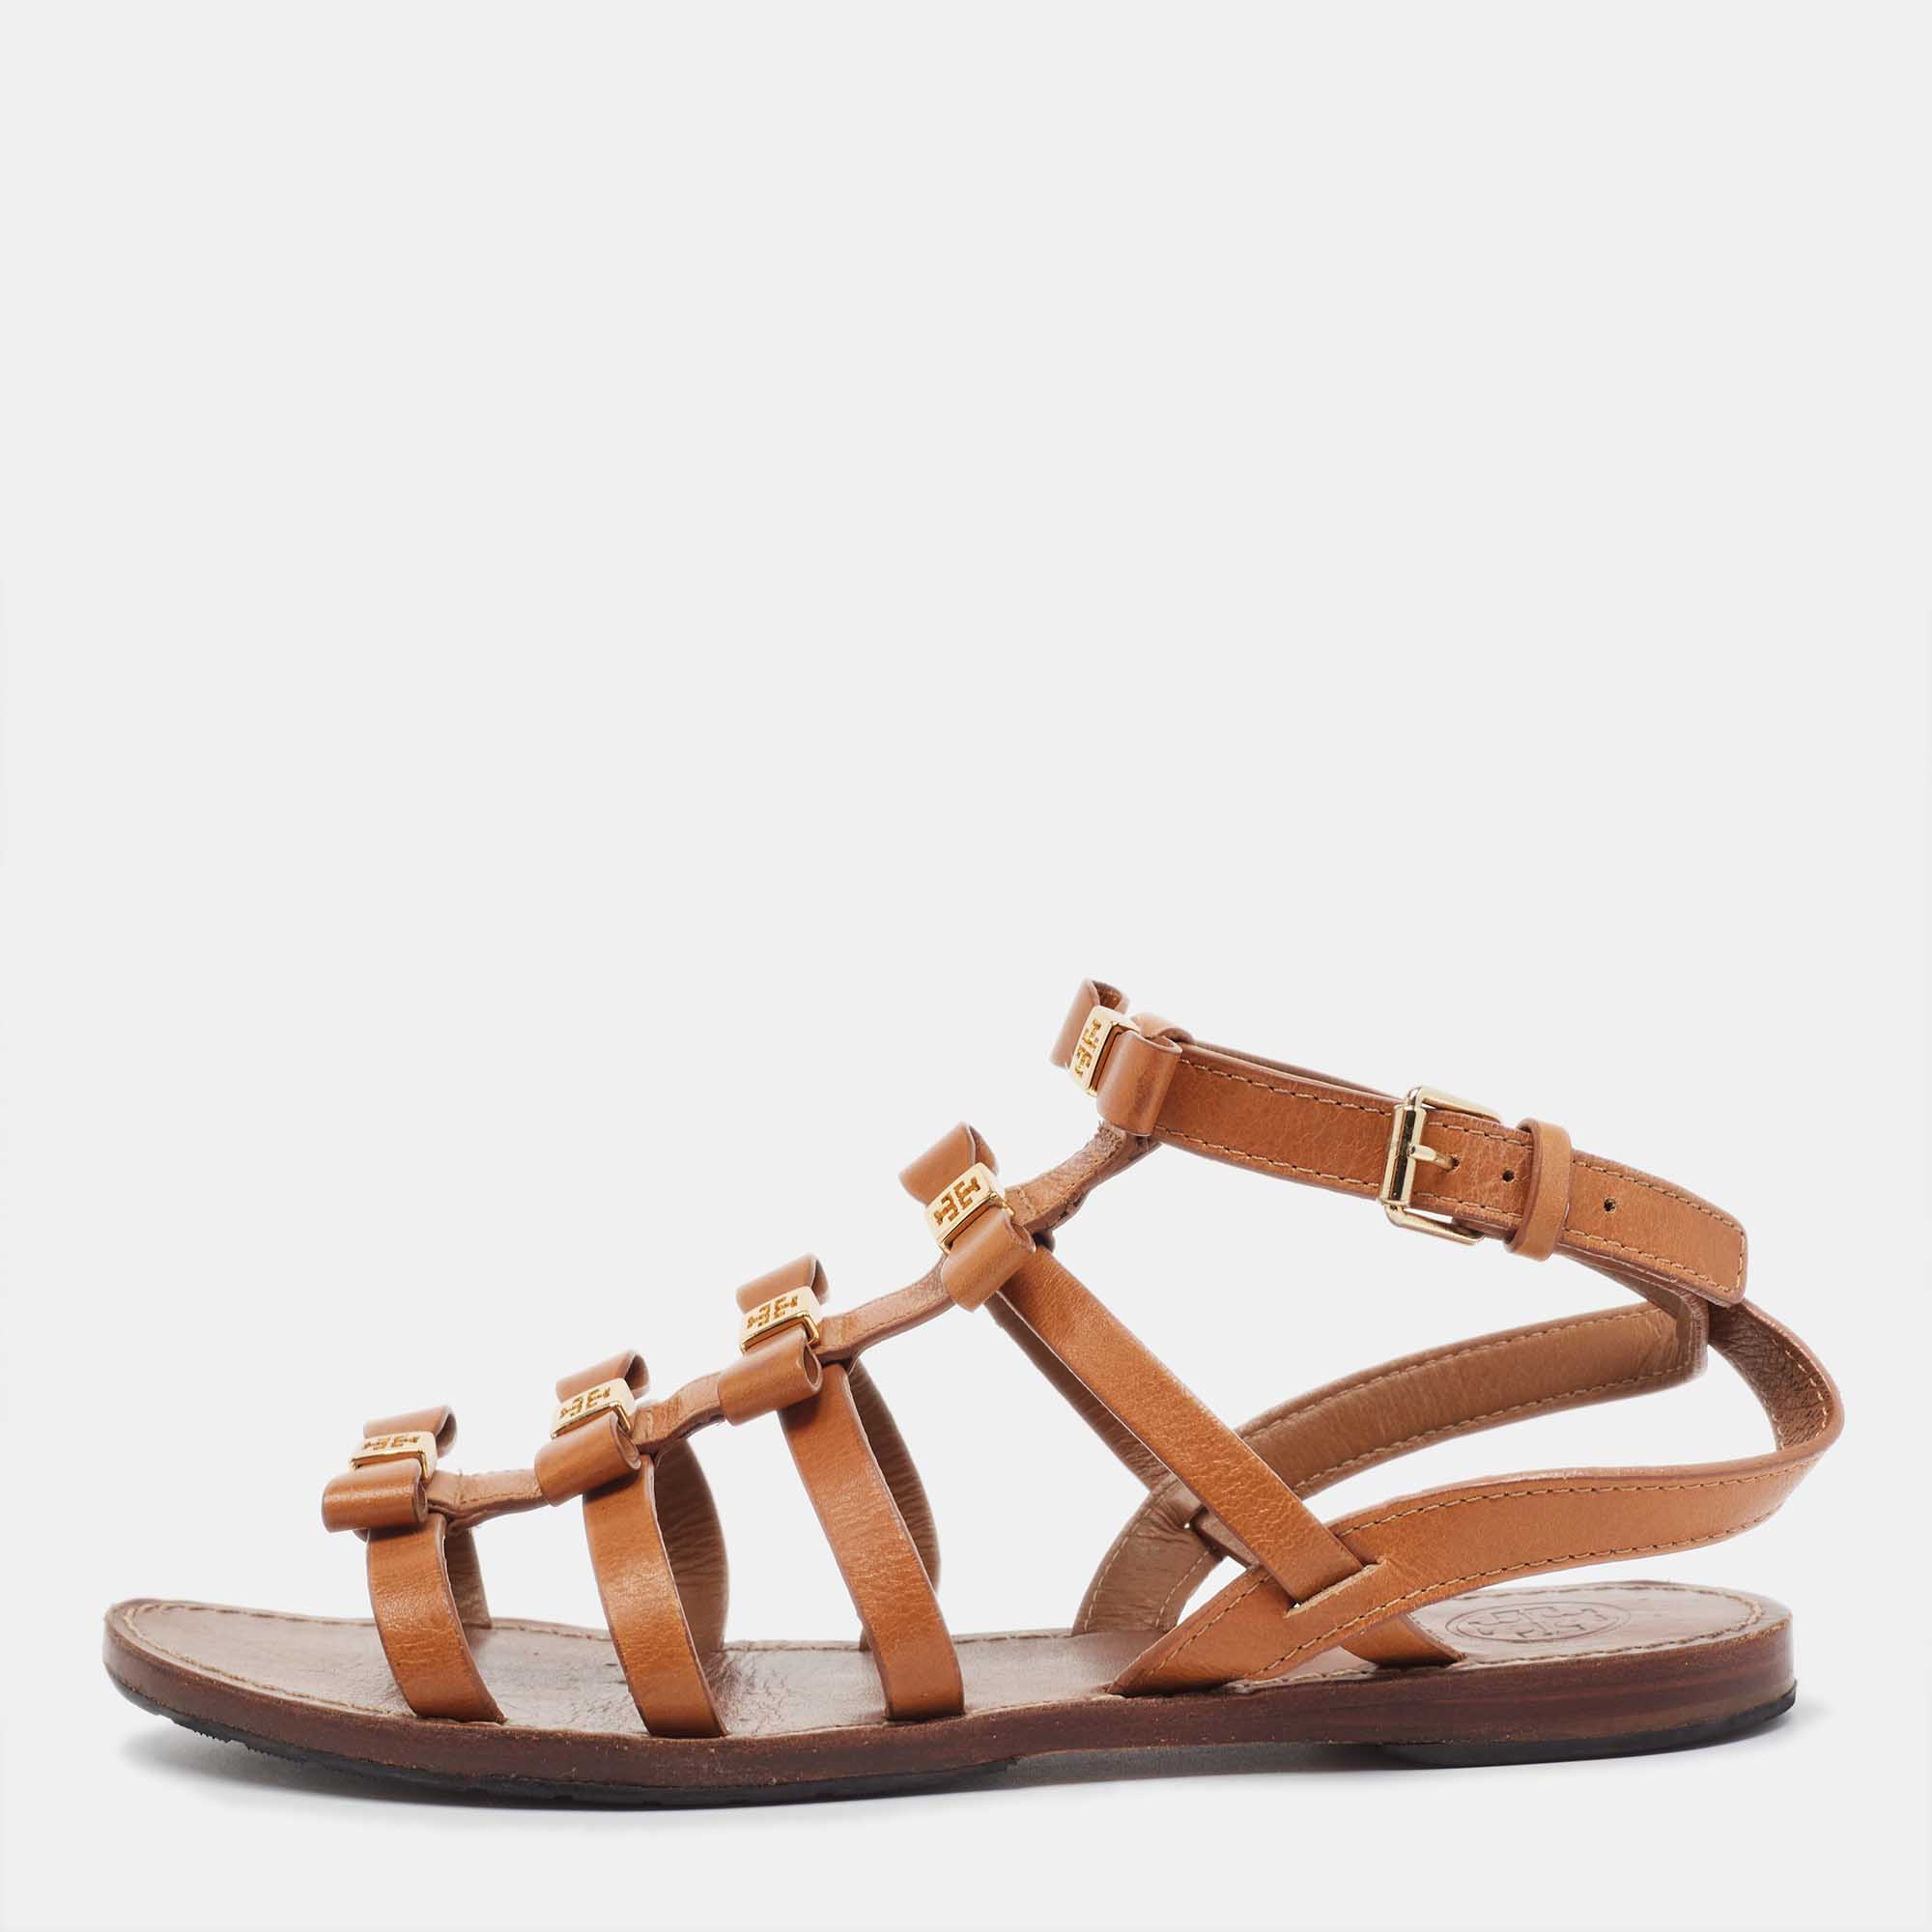 Pre-owned Tory Burch Tan Leather Kira Bow Flat Sandals Size 37